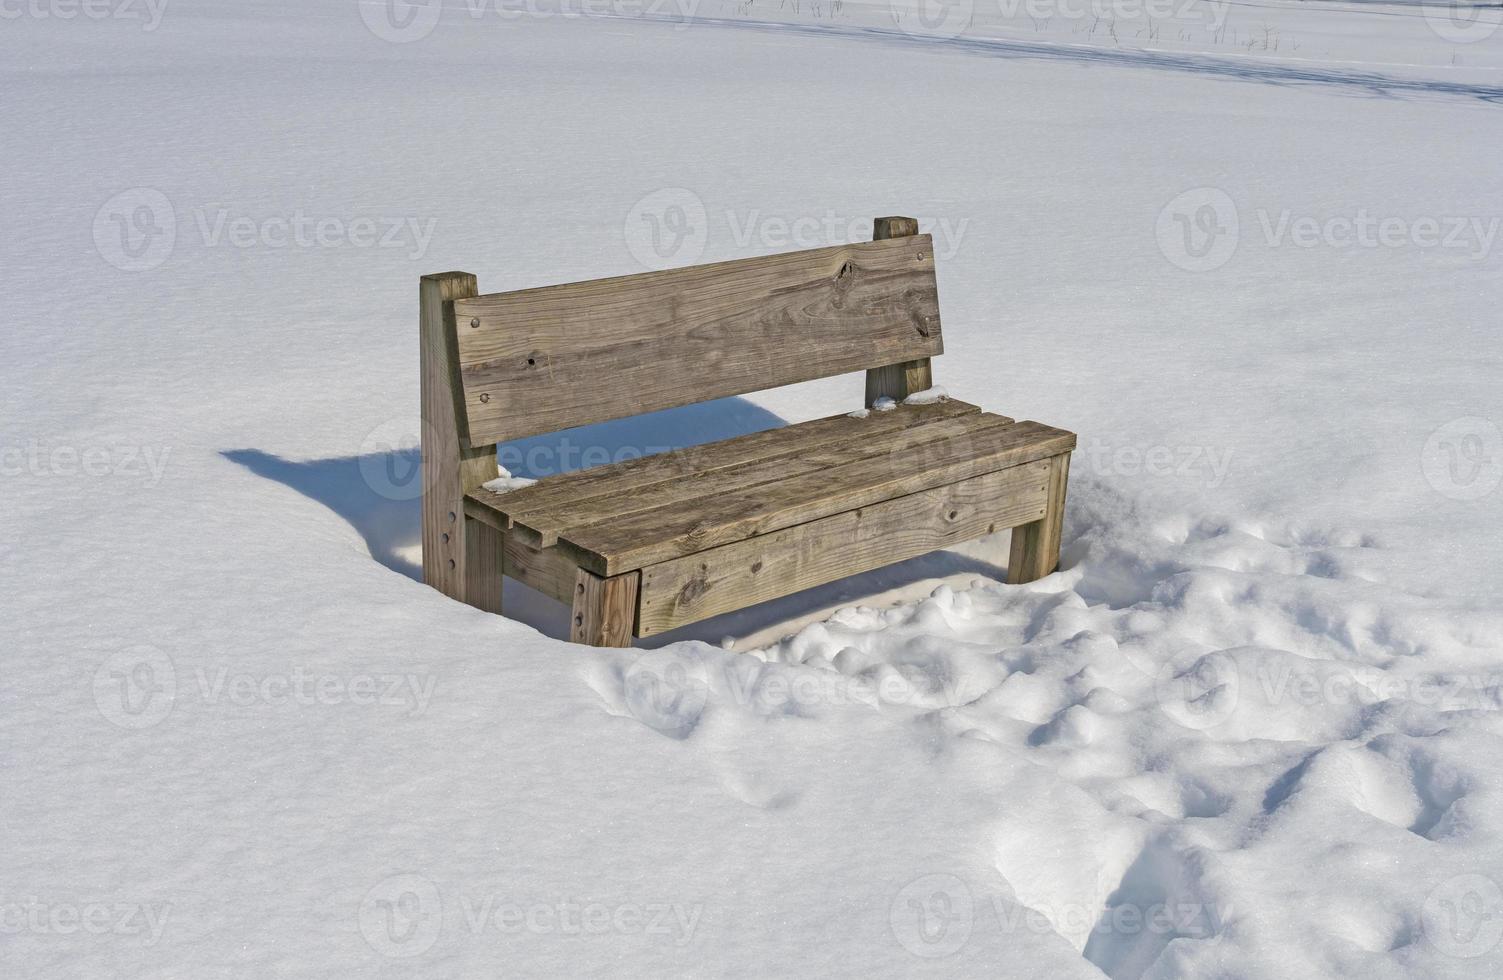 Wooden Bench in Winter Snow photo